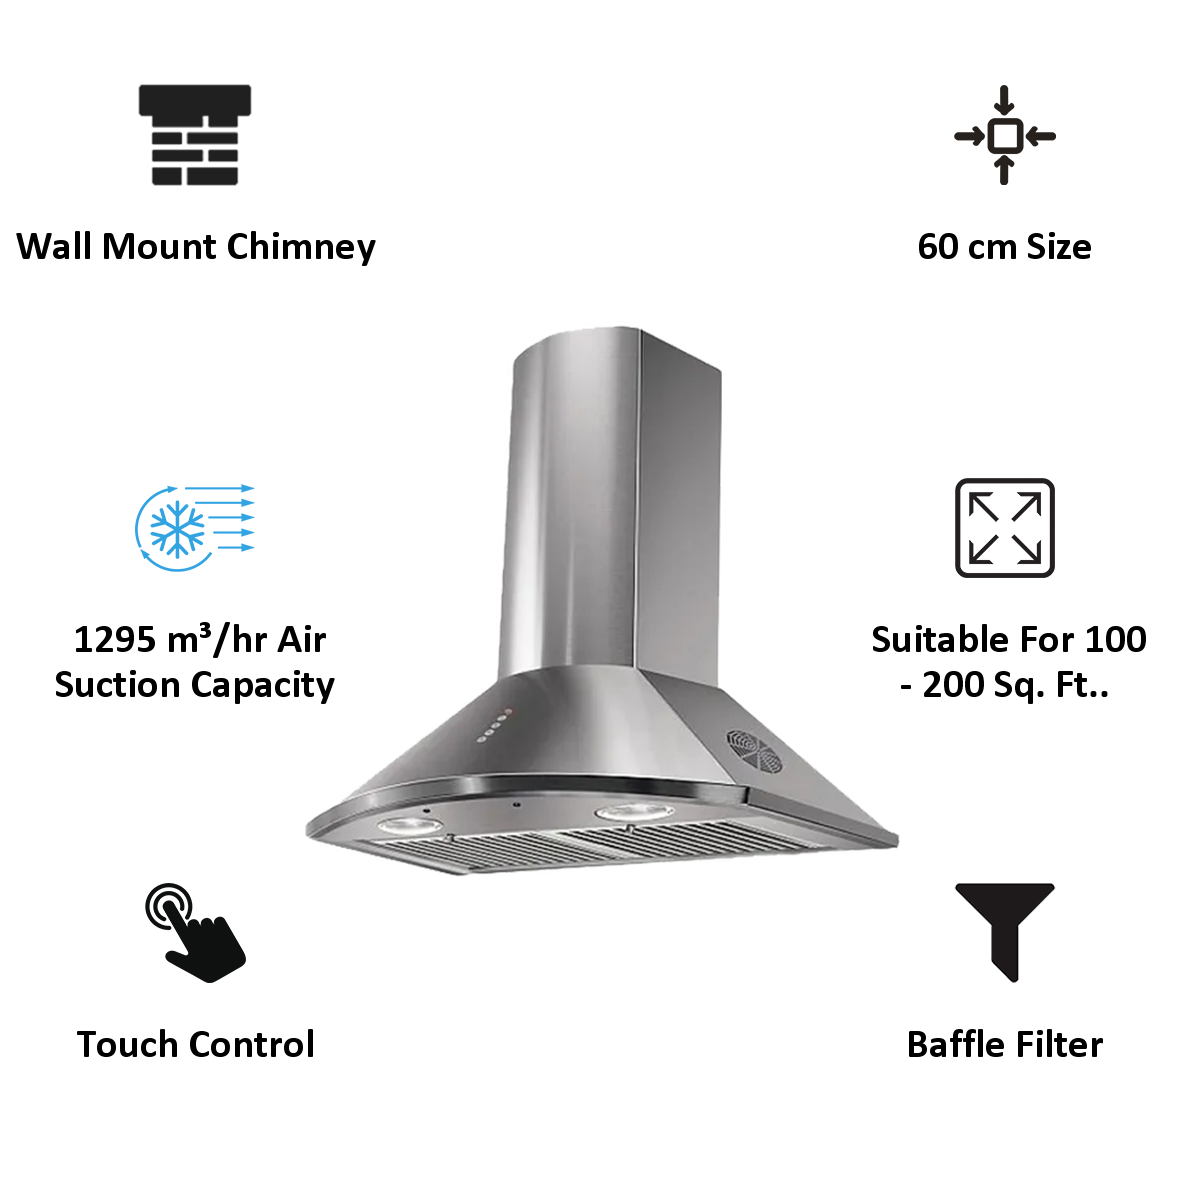 Faber Tender 3D 1295 m³/hr 60cm Wall Mount Chimney (Baffle Filter, T2S2 Max LTW 60, Stainless Steel)_3